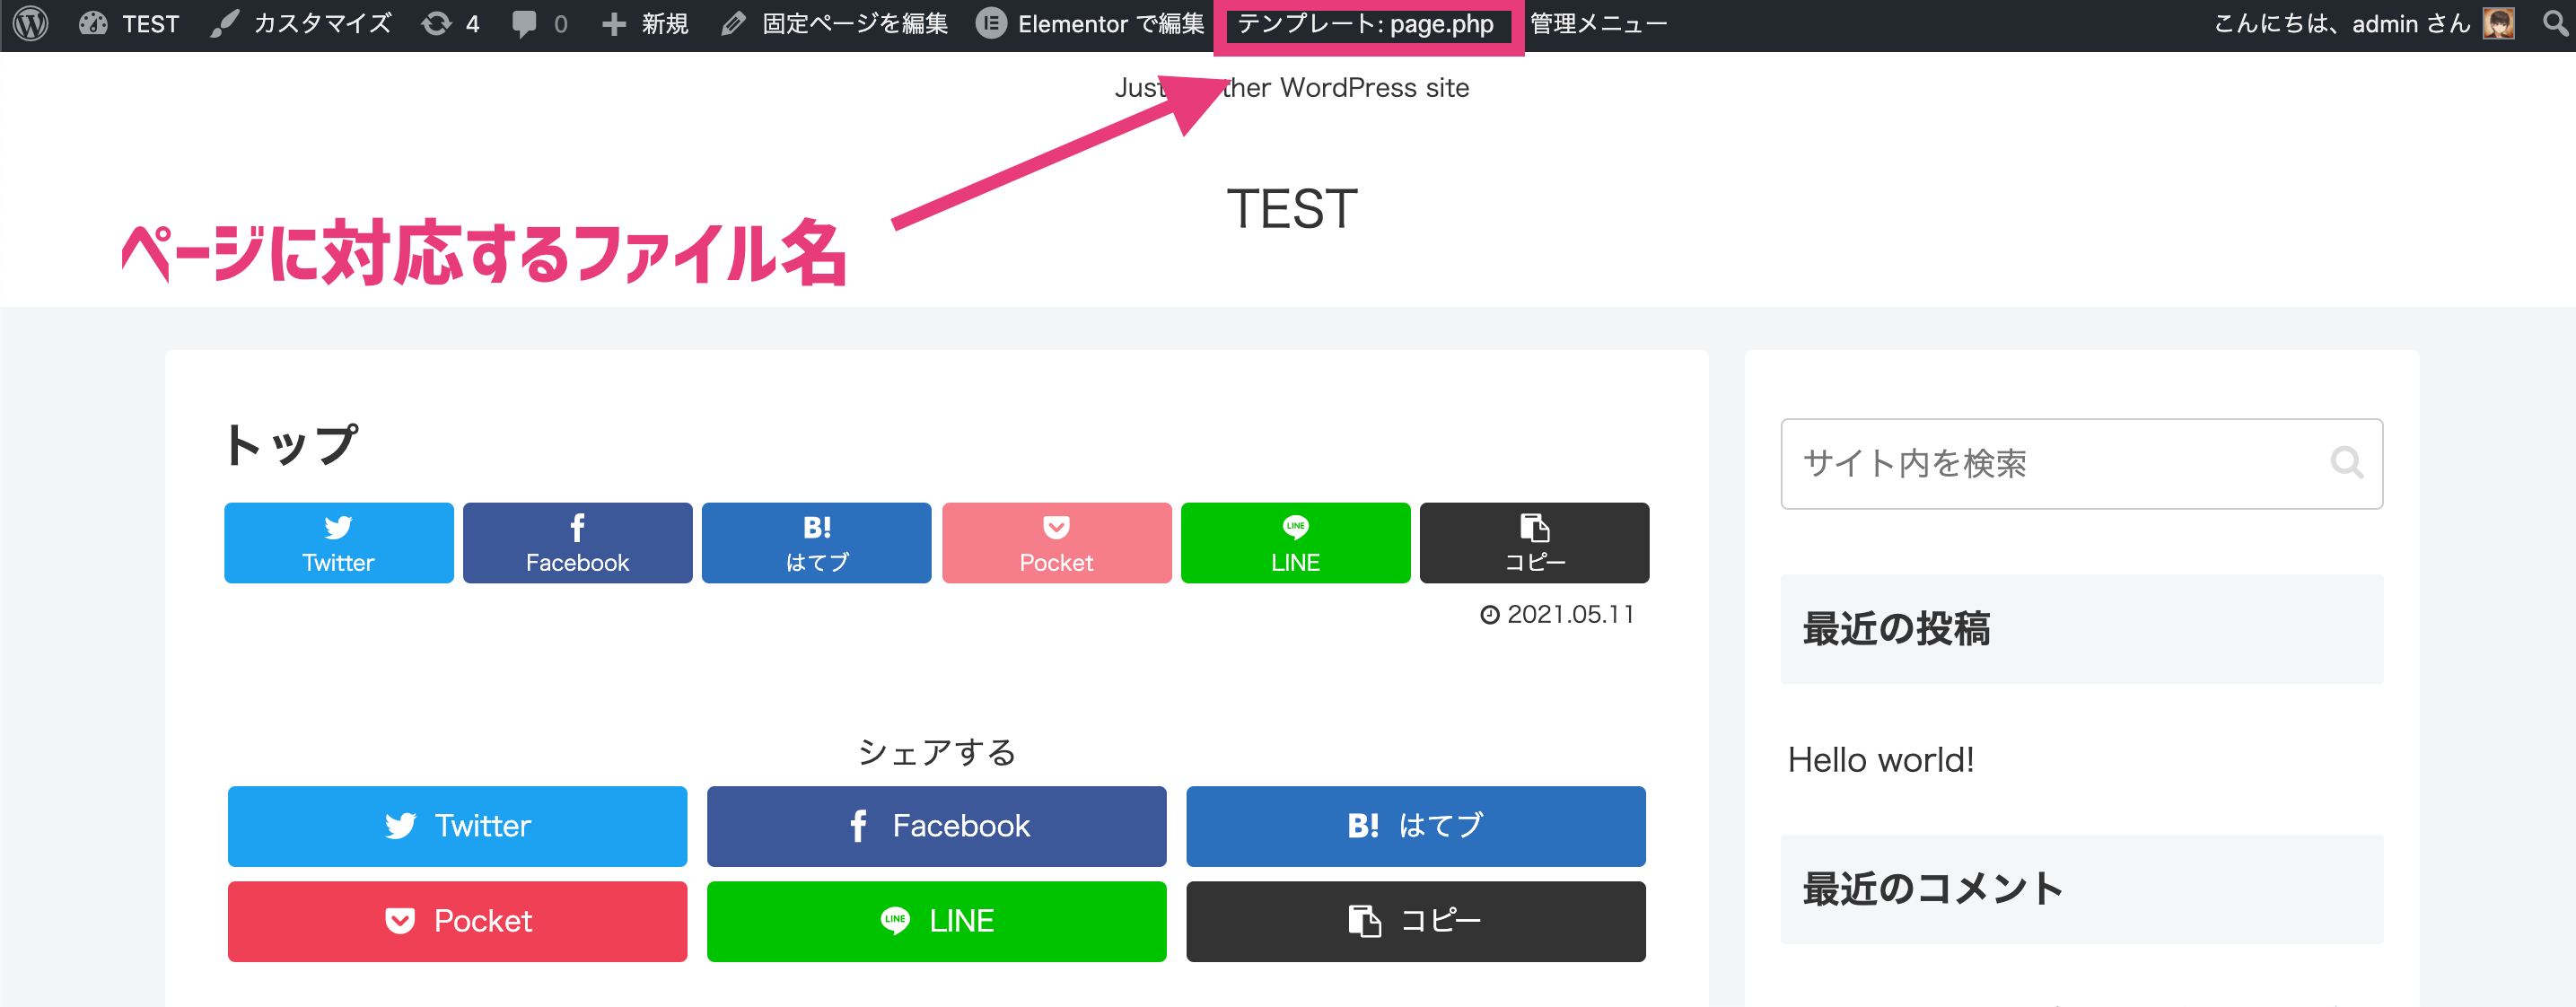 Show Current Templateでファイル名を表示